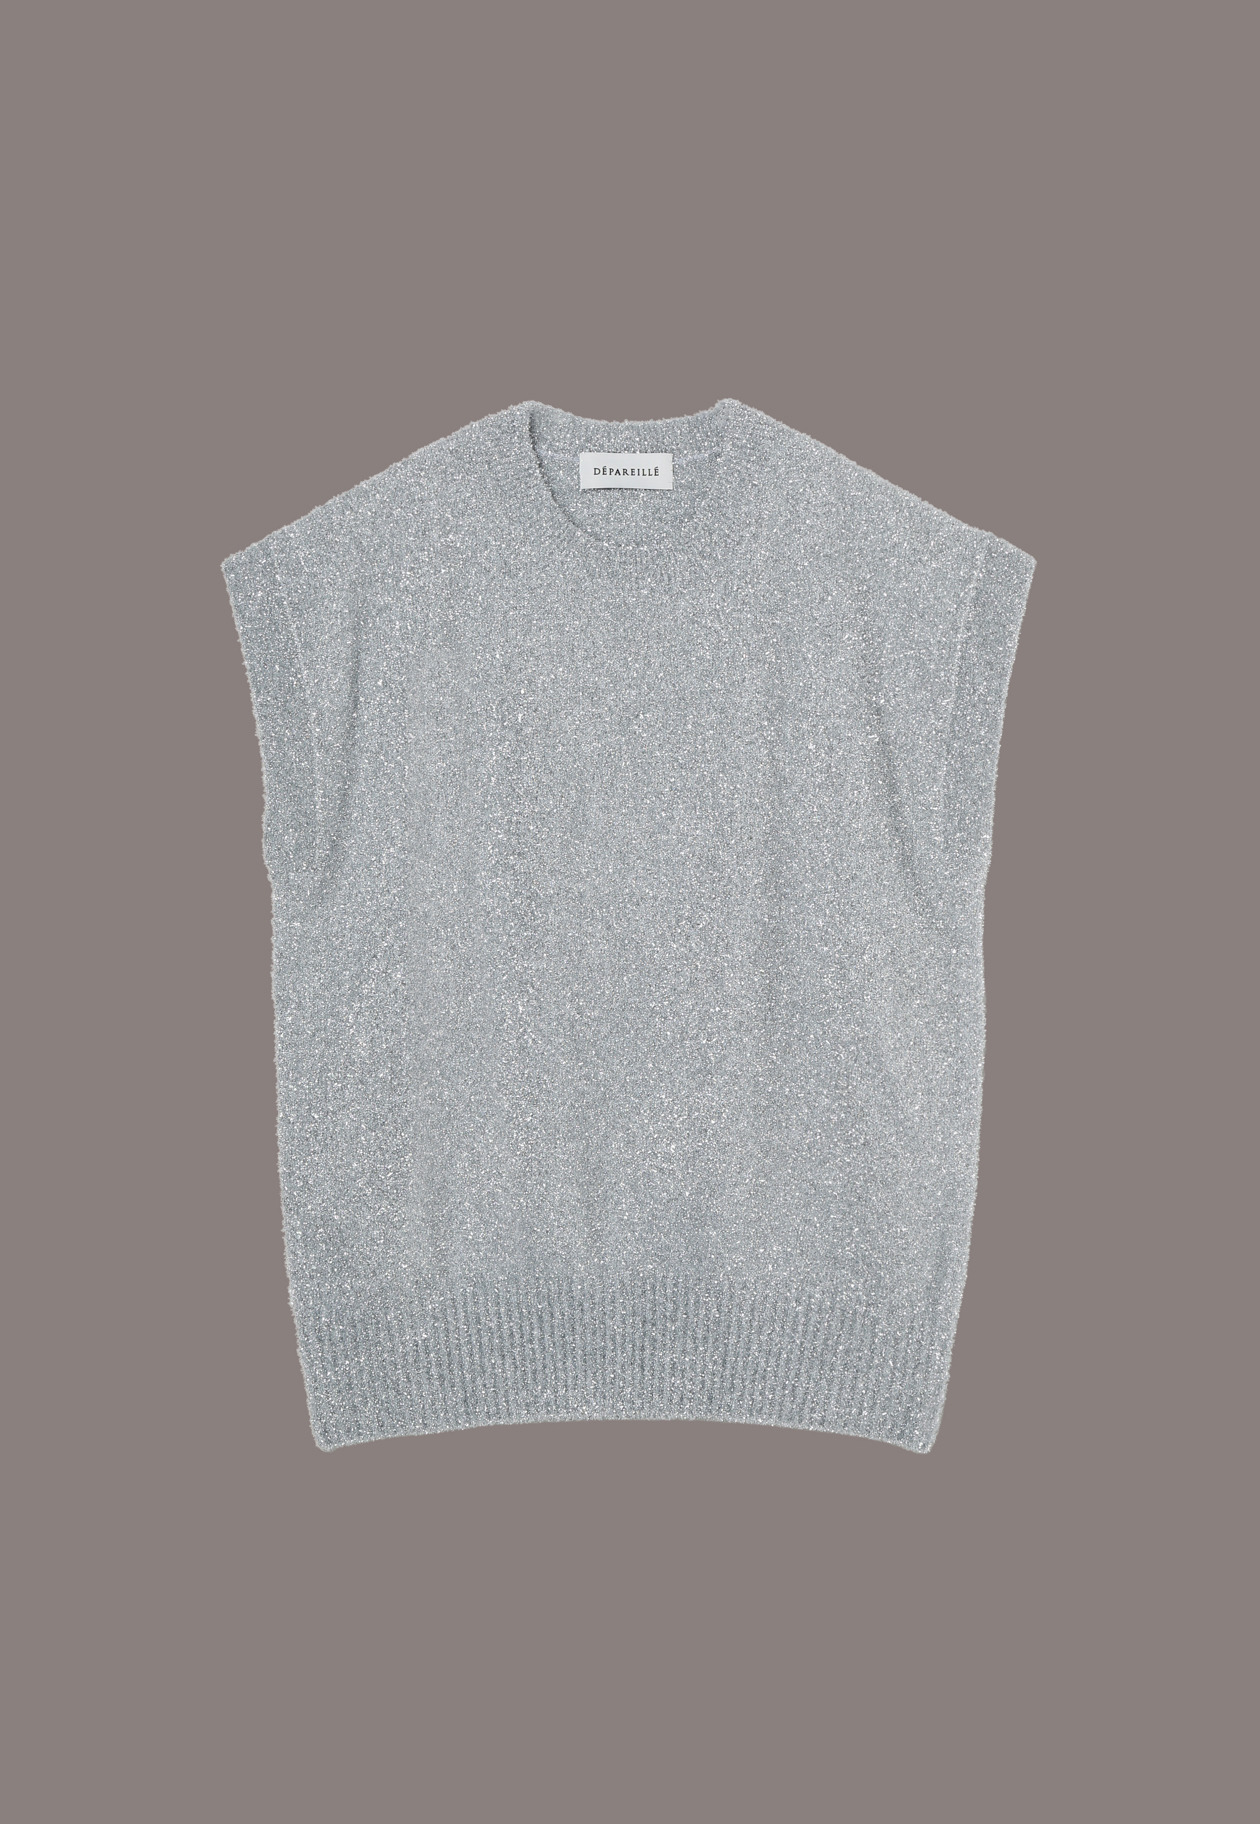 LAME YARN KNIT PULL-OVER 詳細画像 Silver 1